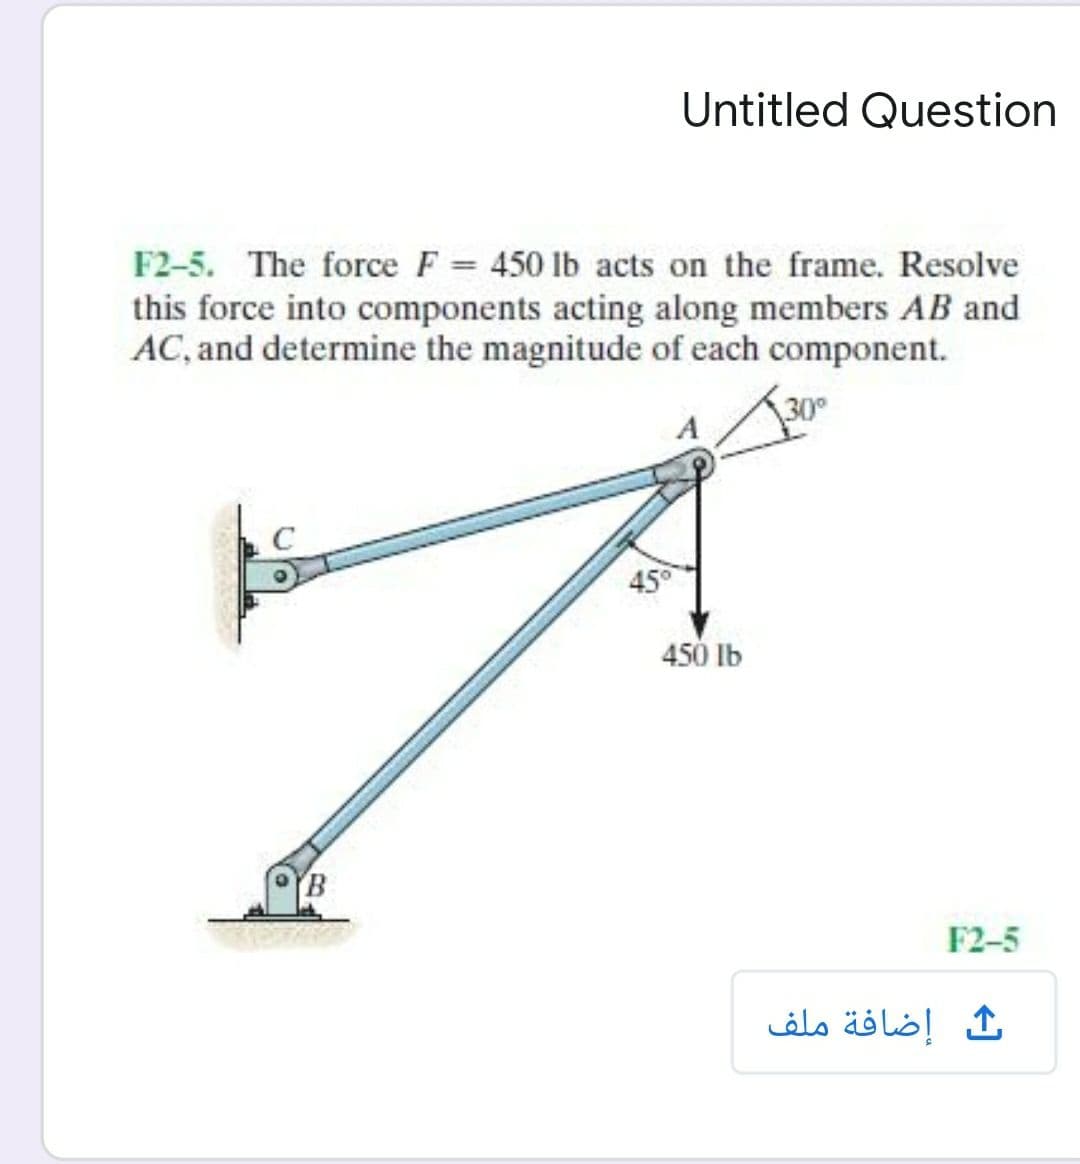 Untitled Question
F2-5. The force F = 450 lb acts on the frame. Resolve
this force into components acting along members AB and
AC, and determine the magnitude of each component.
30
45°
450 Ib
YB
F2-5
إضافة ملف
